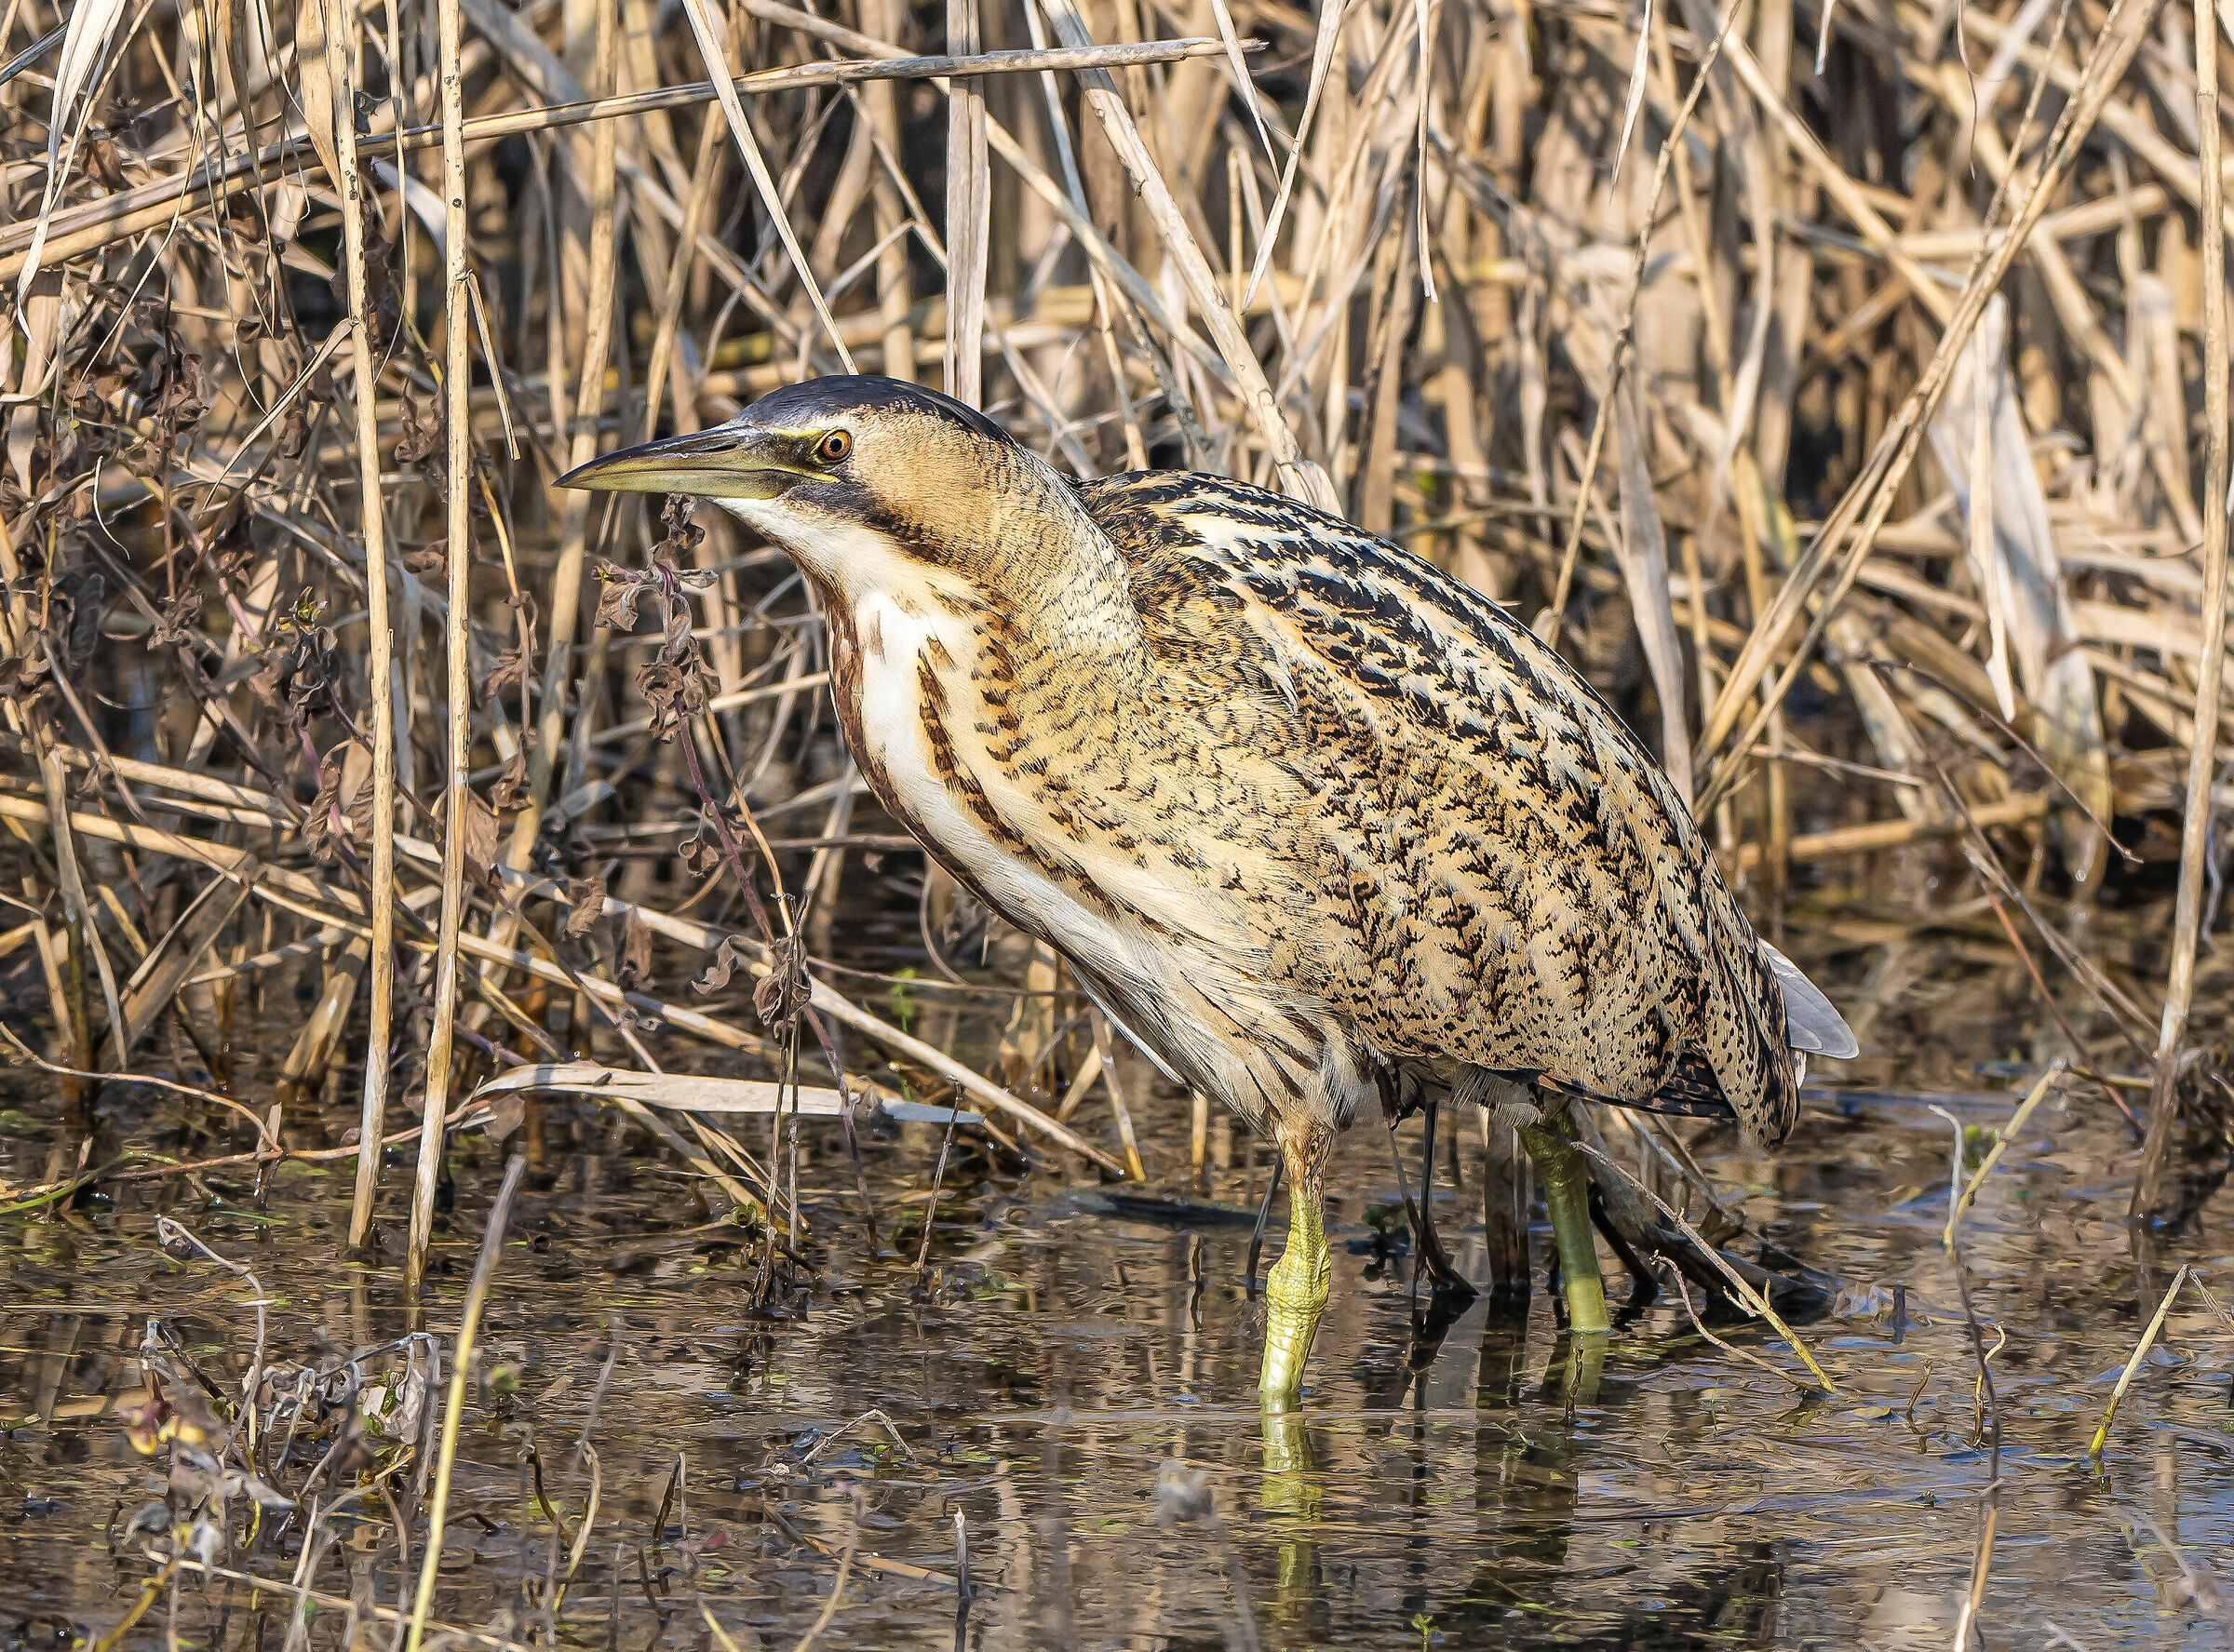 It's out of the reeds! Bittern...